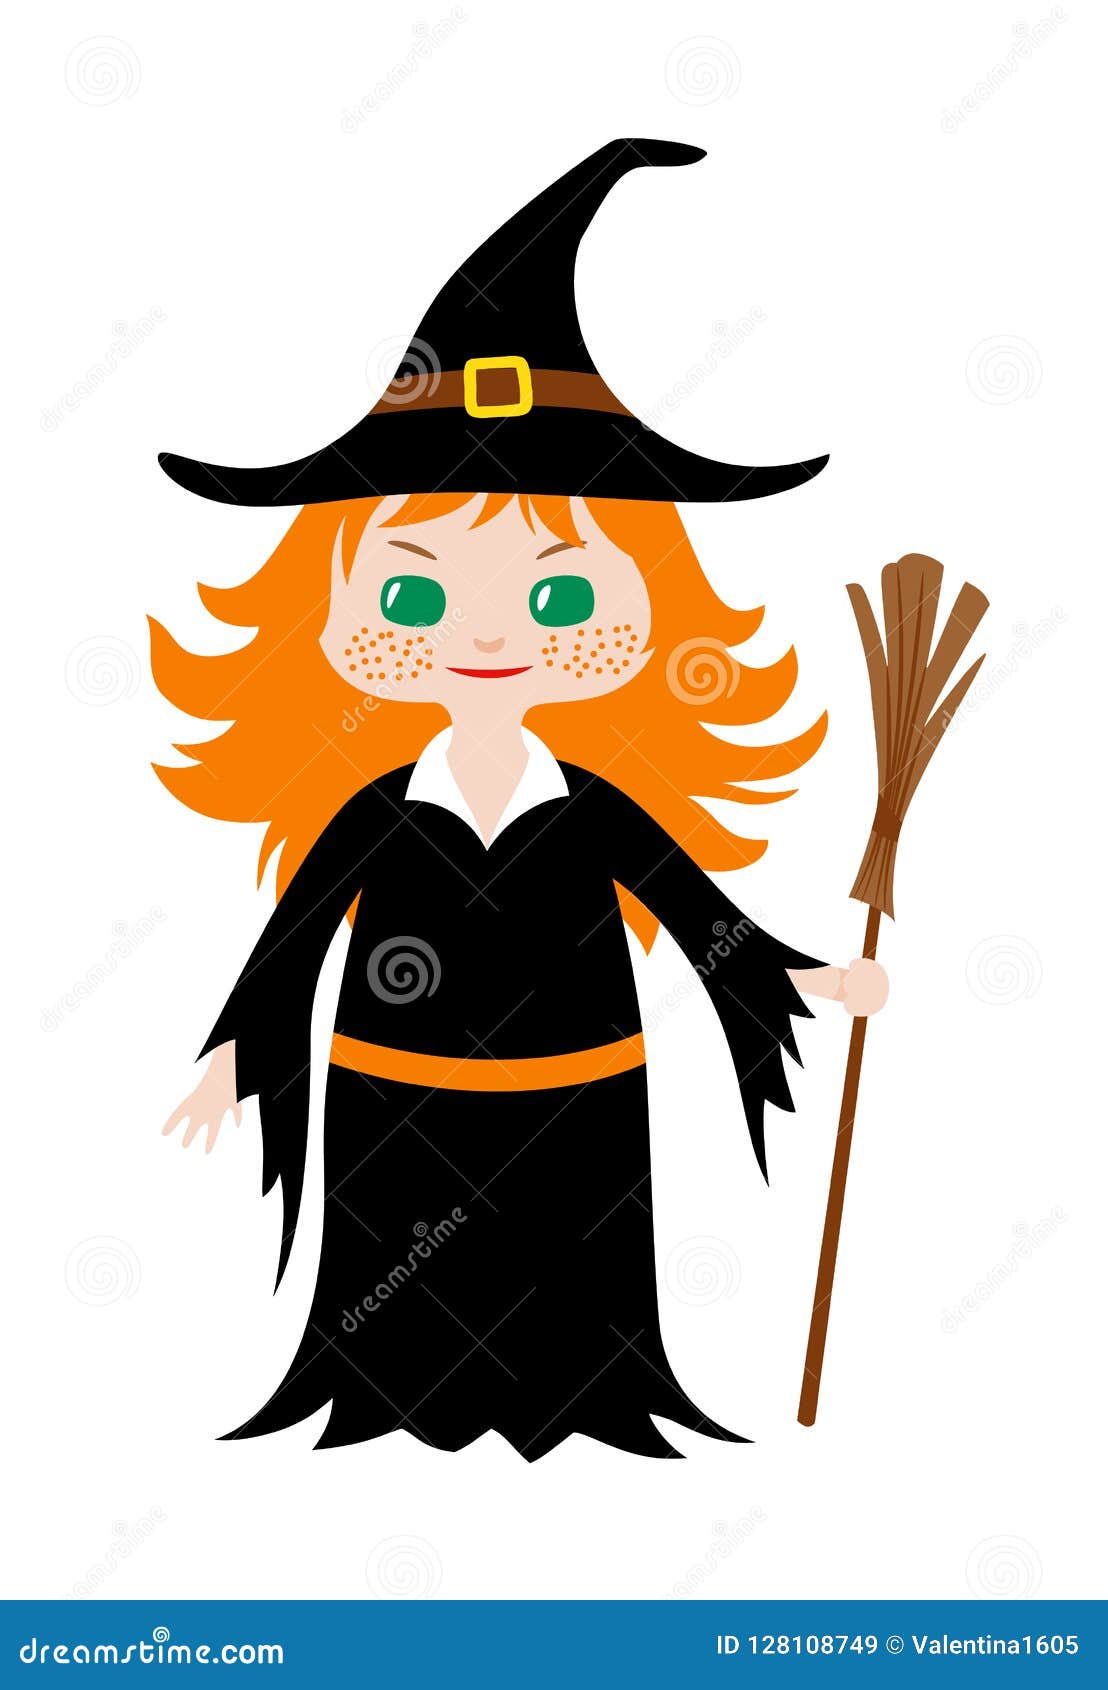 Halloween Witch Costume. Chibi Style Stock Vector - Illustration of ...